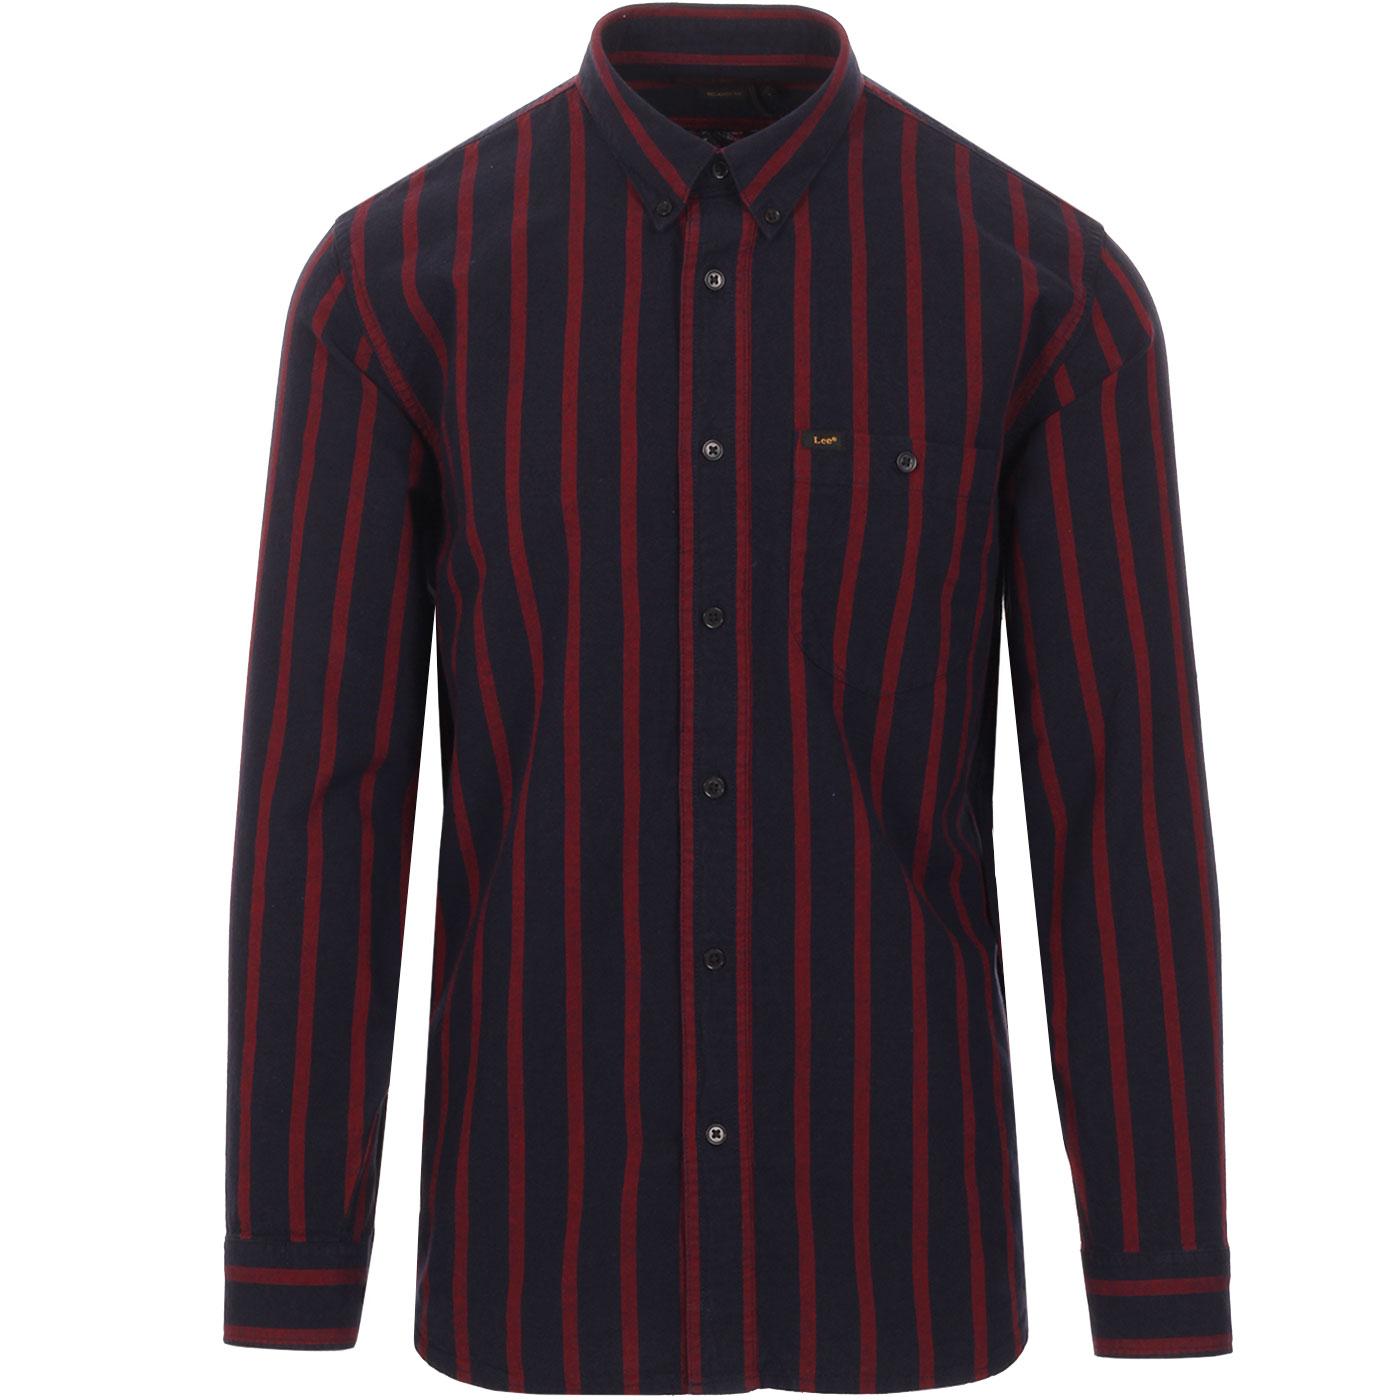 LEE JEANS Men's Relaxed Fit Riveted Stripe Shirt